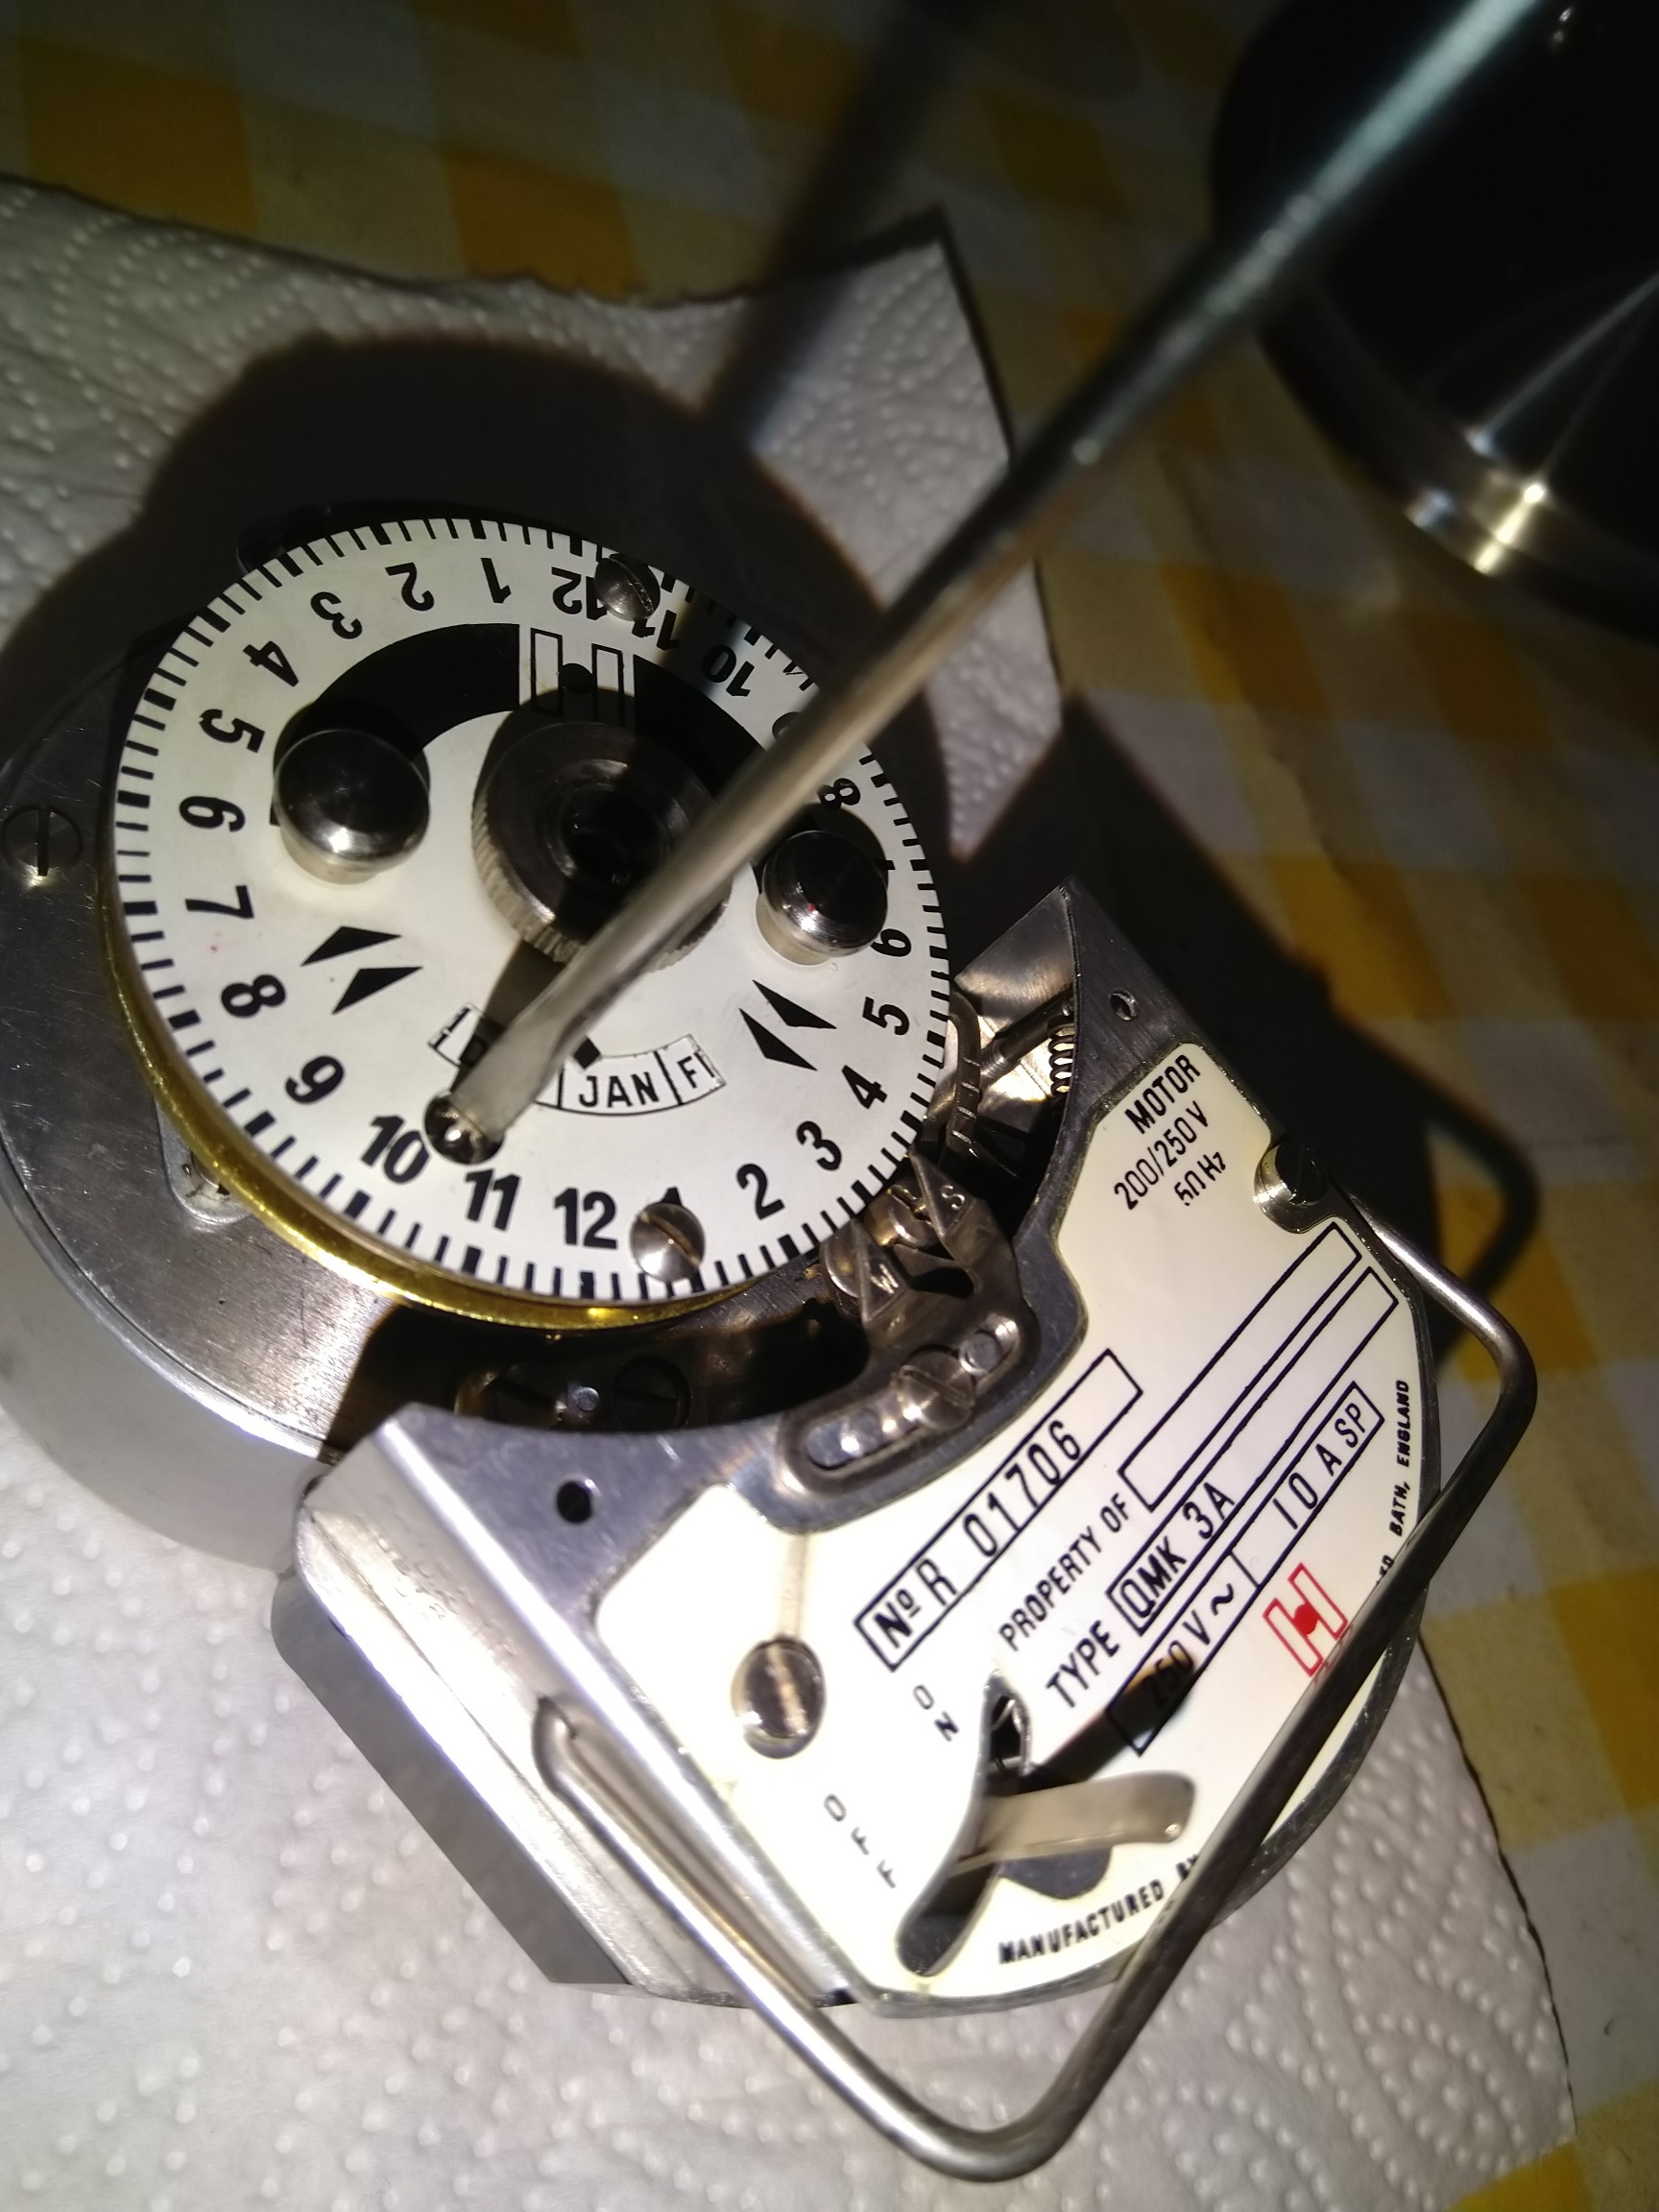 Adjusting the date on a timeswitch